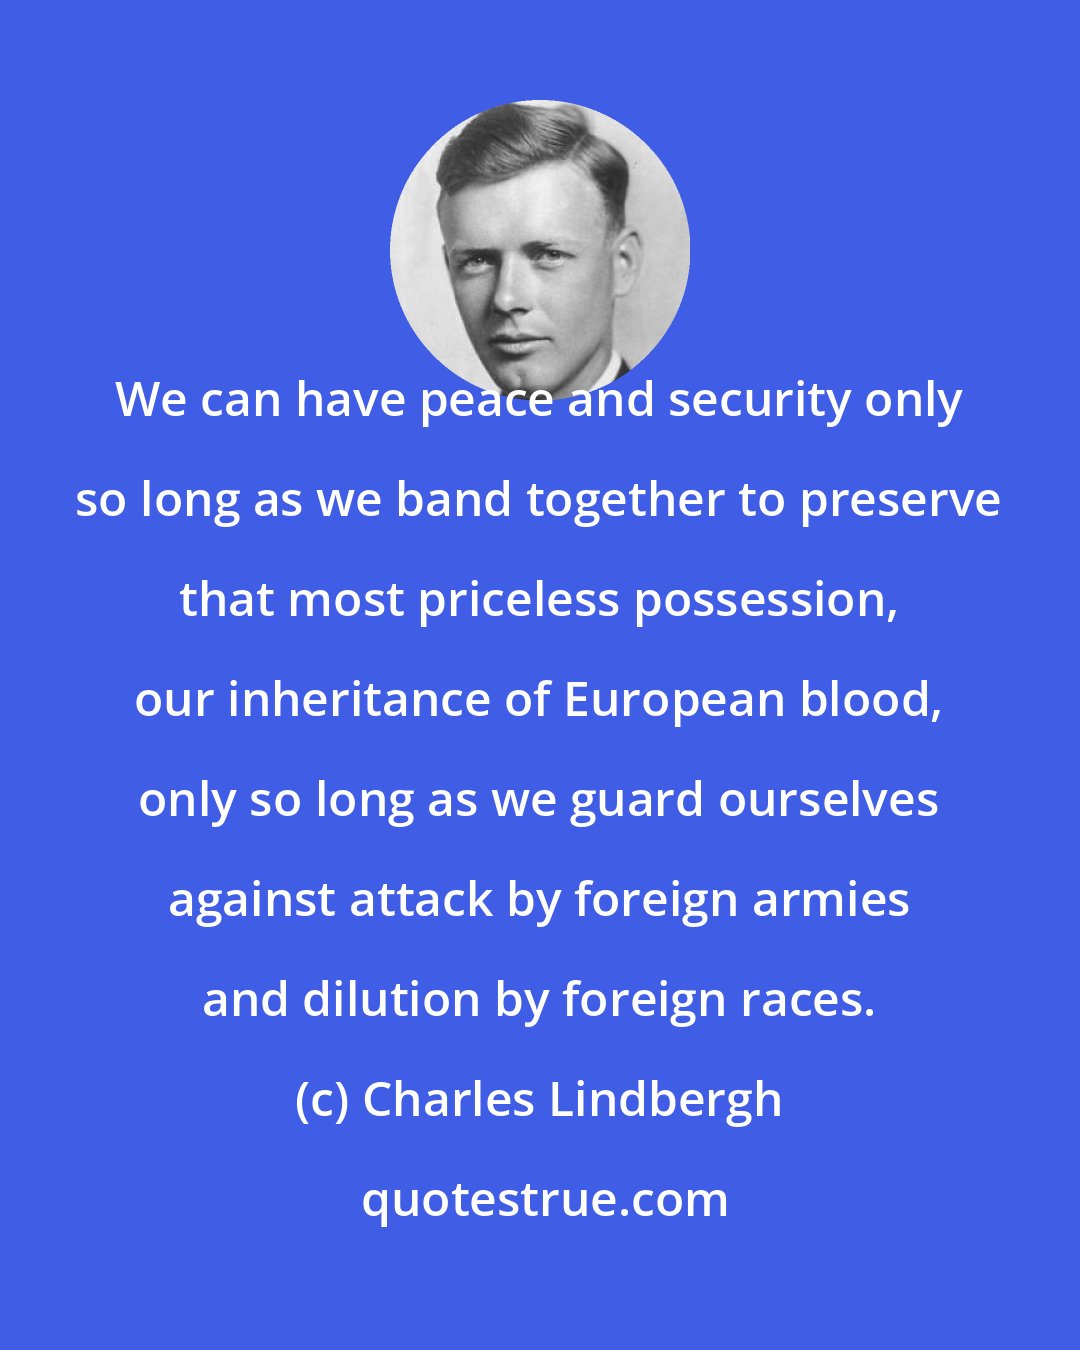 Charles Lindbergh: We can have peace and security only so long as we band together to preserve that most priceless possession, our inheritance of European blood, only so long as we guard ourselves against attack by foreign armies and dilution by foreign races.